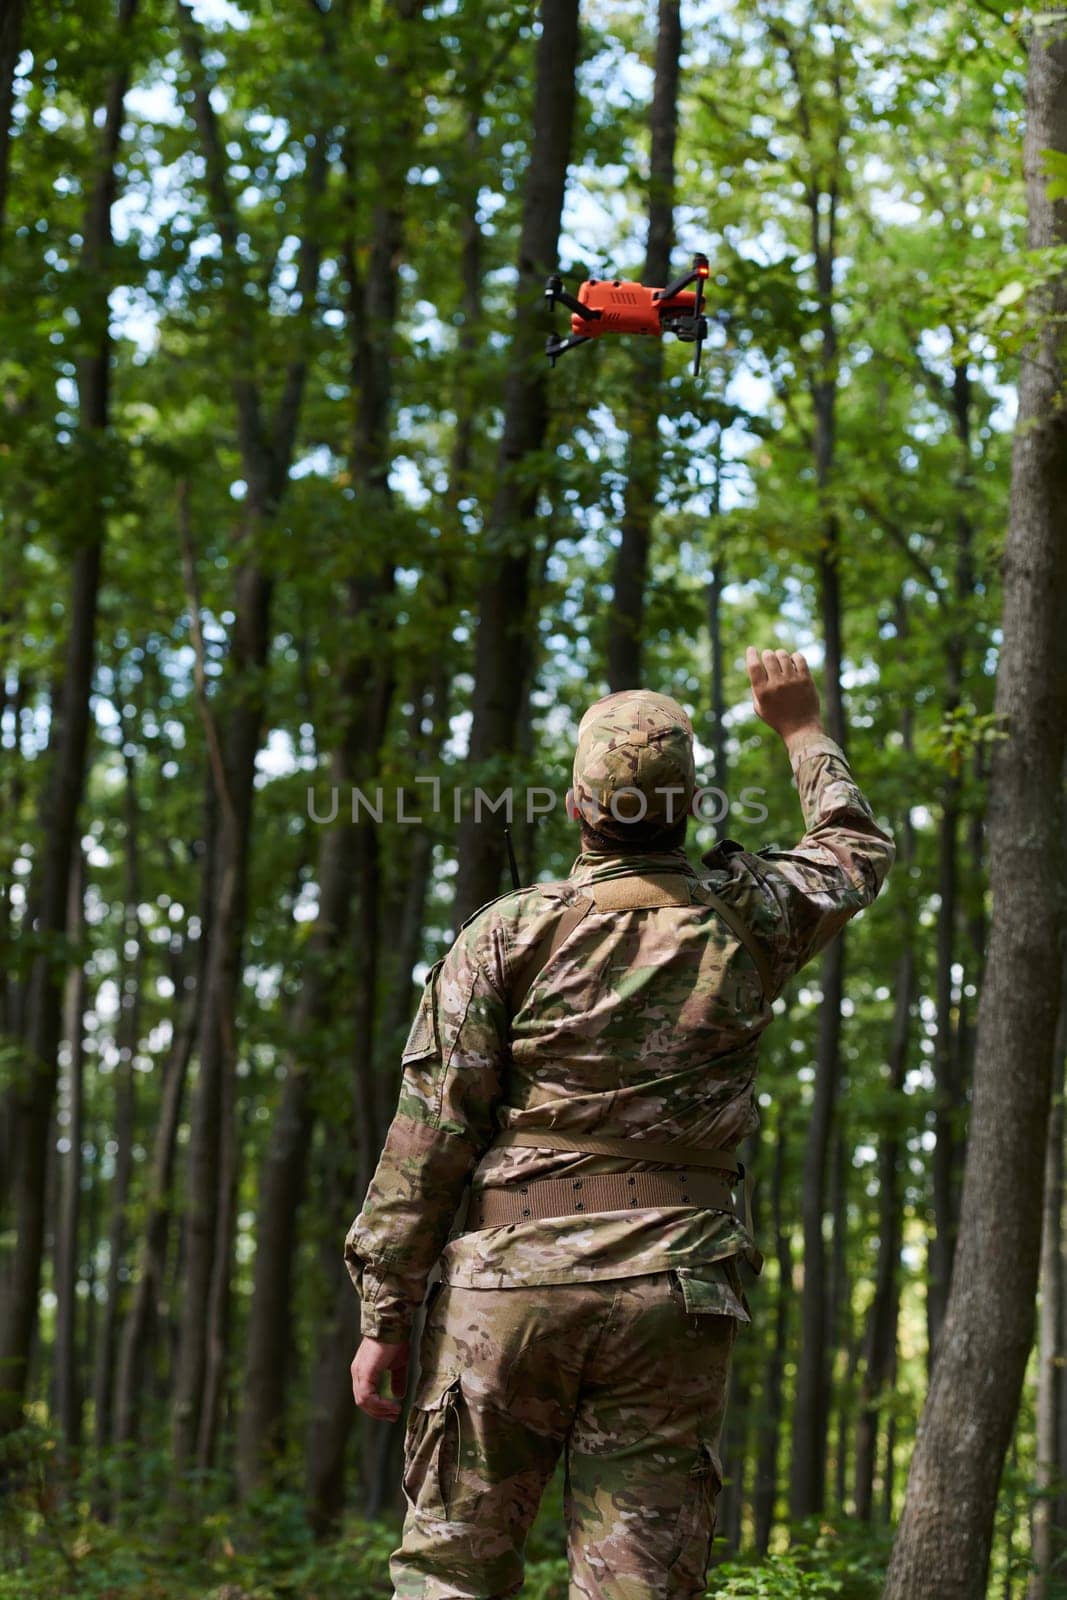 Elite military unit, equipped with state-of-the-art technology including a drone, strategically navigates and surveys dangerous wooded terrain, showcasing their precision, cooperation, and specialized training for high-risk operations by dotshock